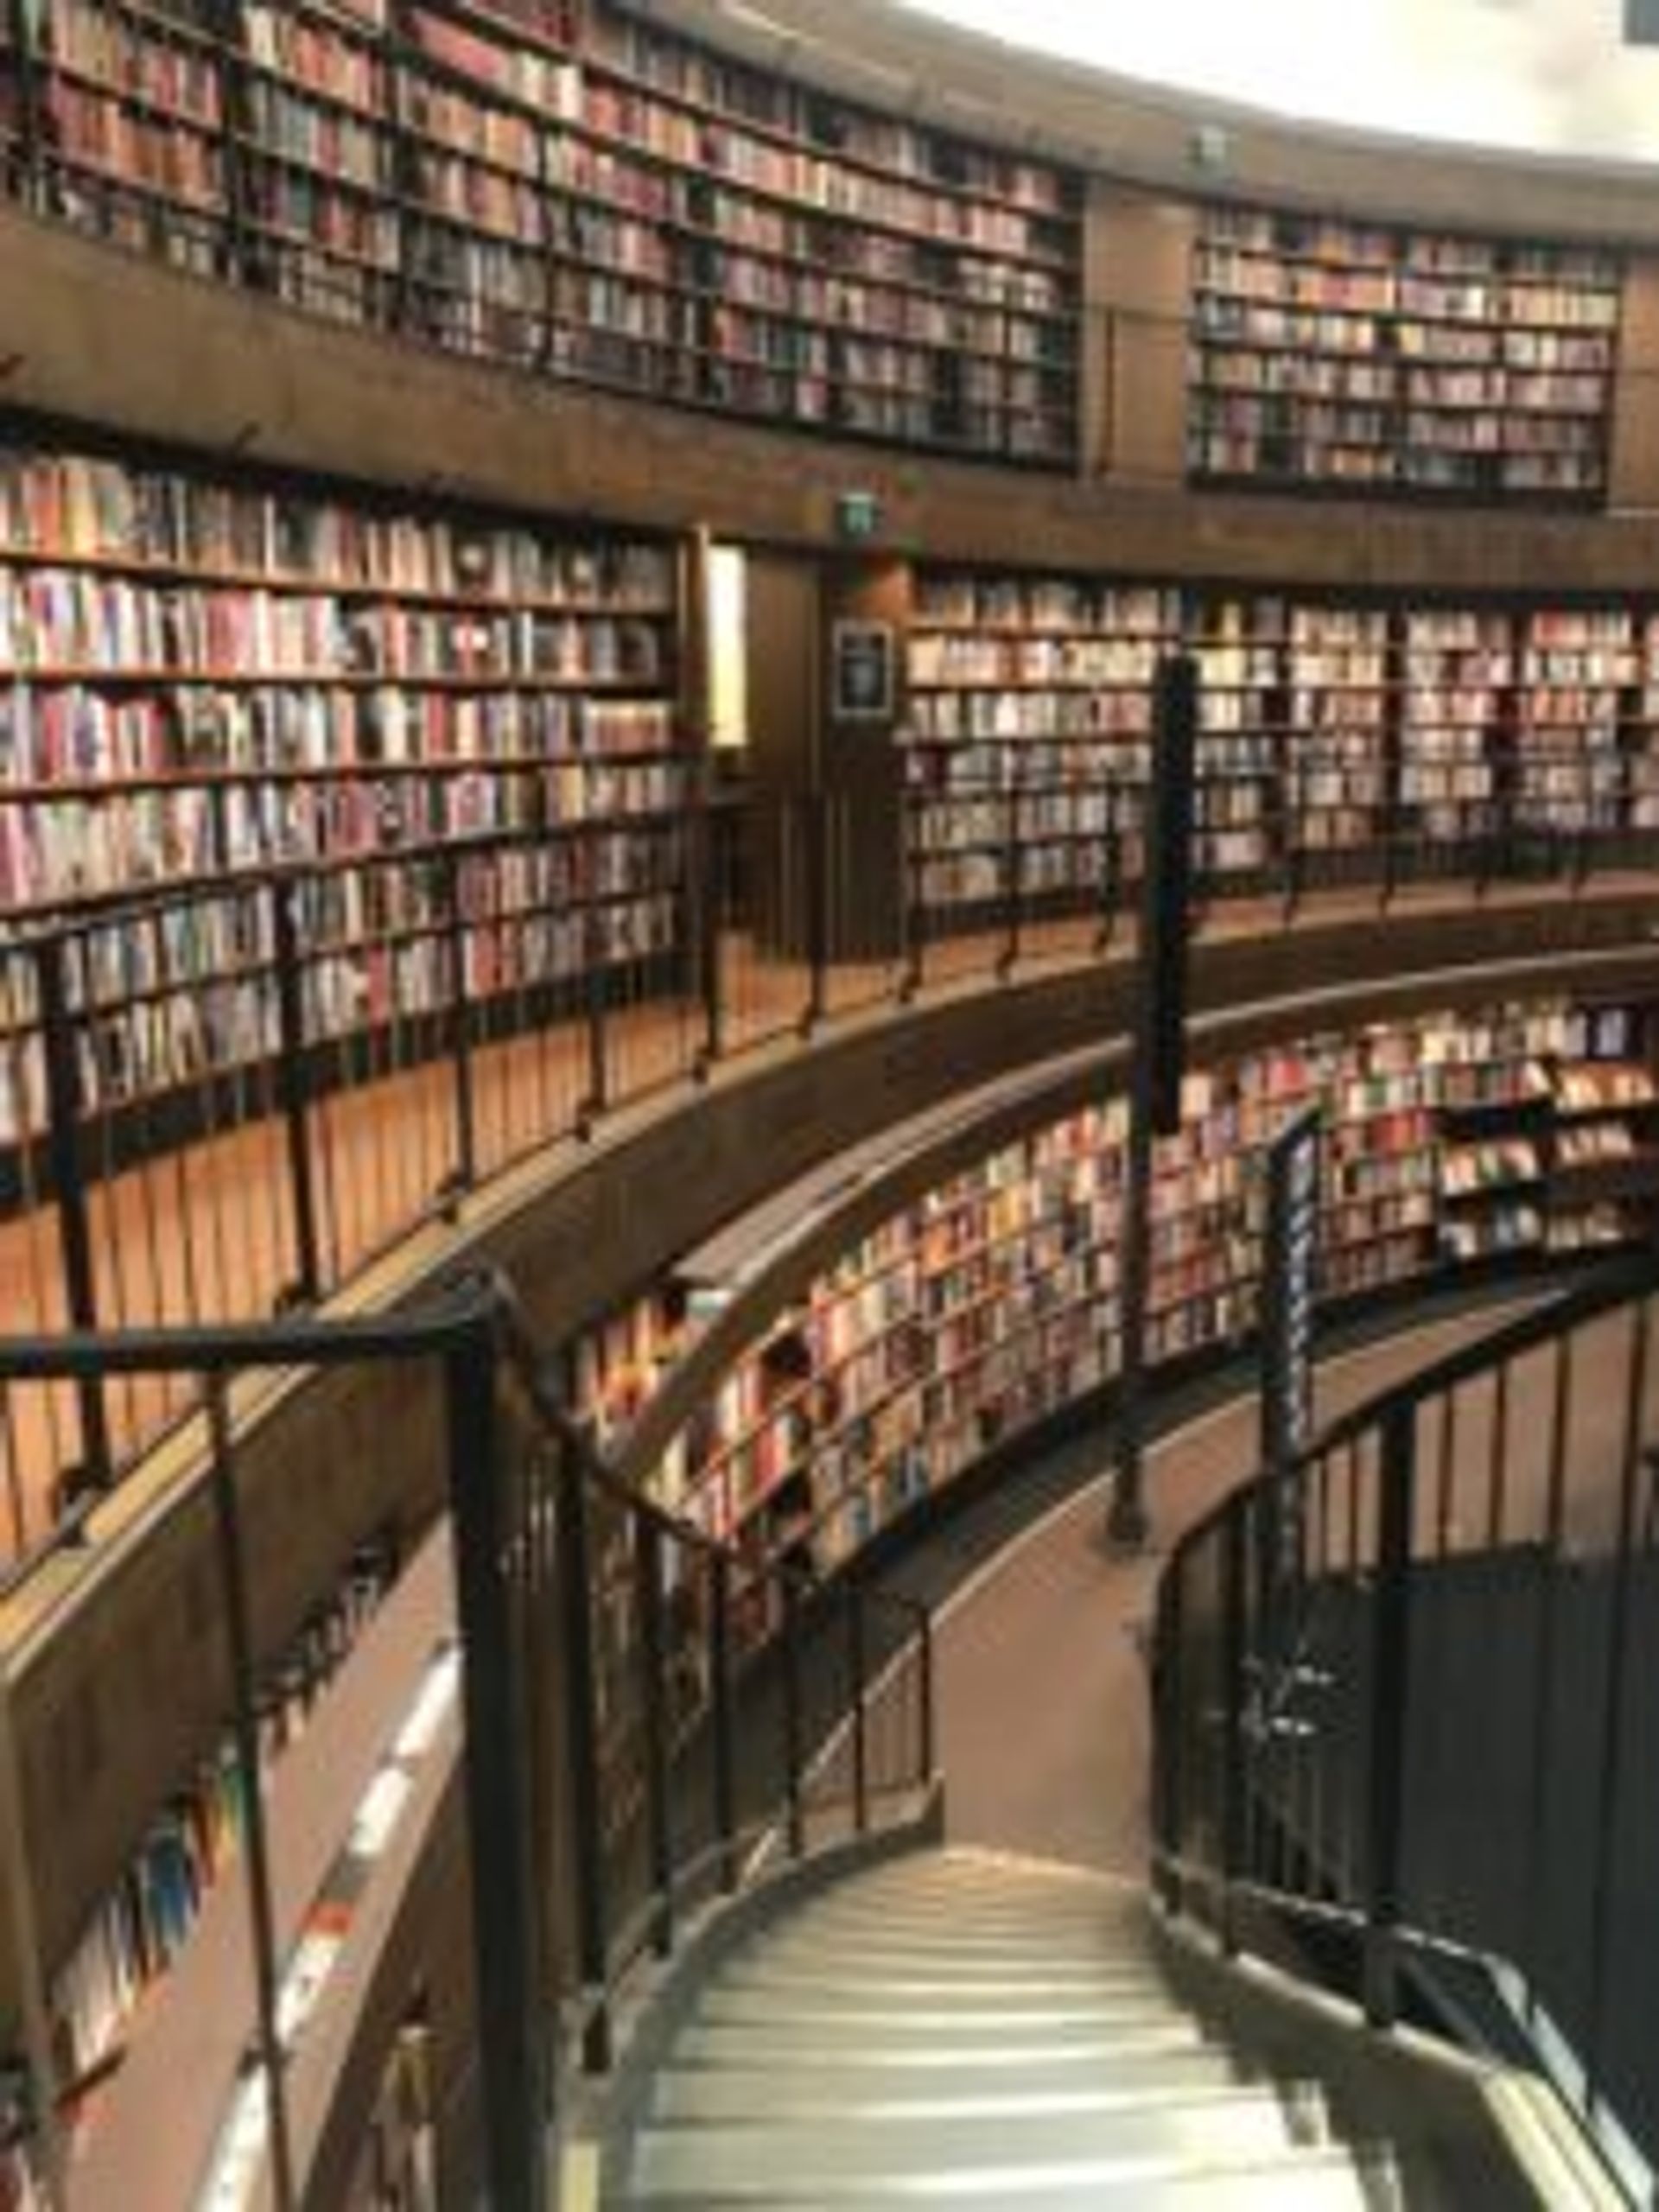 Stairs leading down to a different level of Stockholm's City Library.